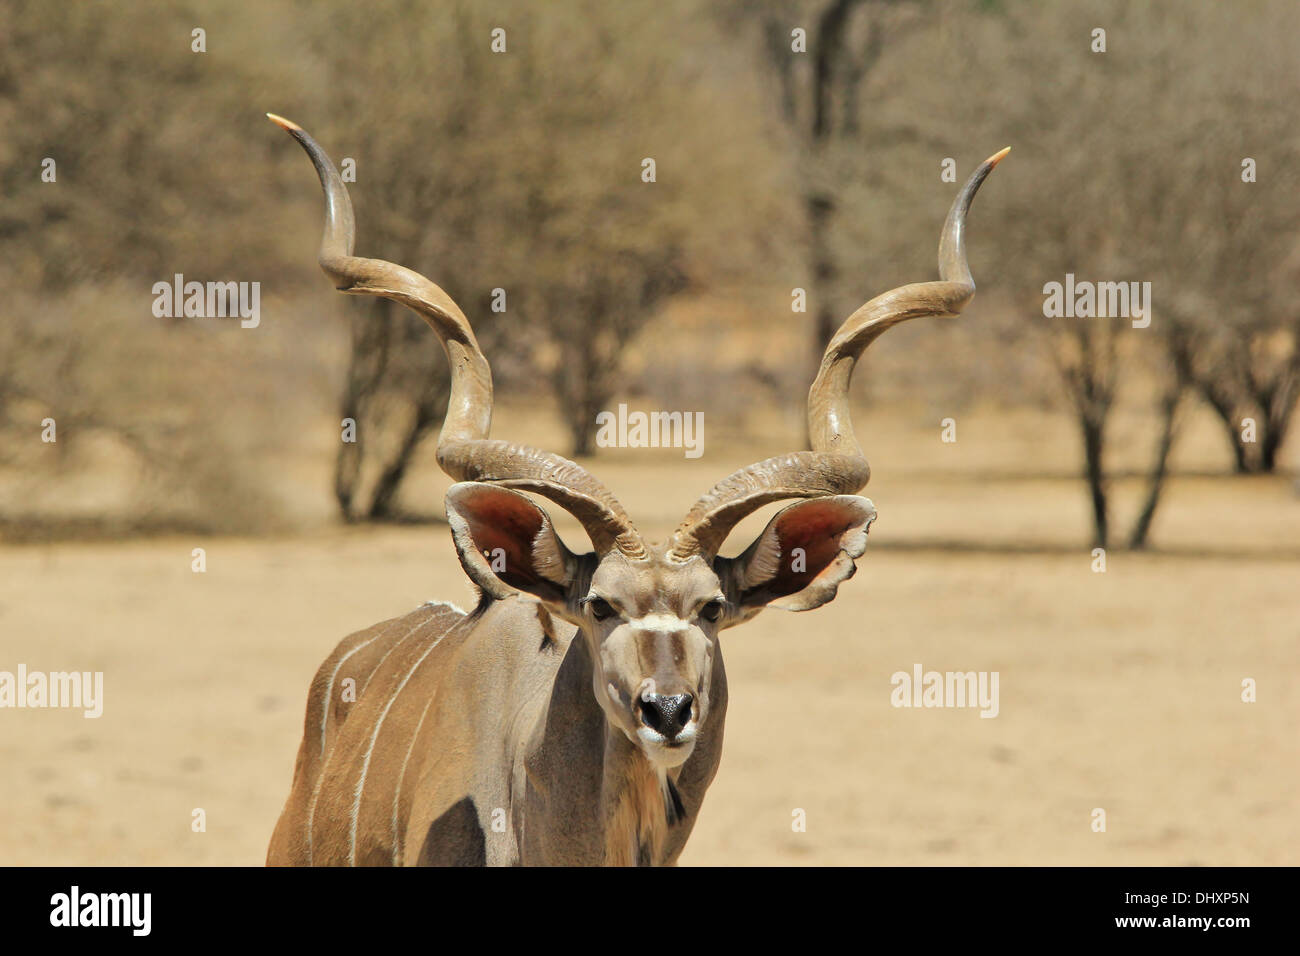 Kudu Bull - Wildlife Background from Africa - Spiral Horns of Pride and Beauty Stock Photo